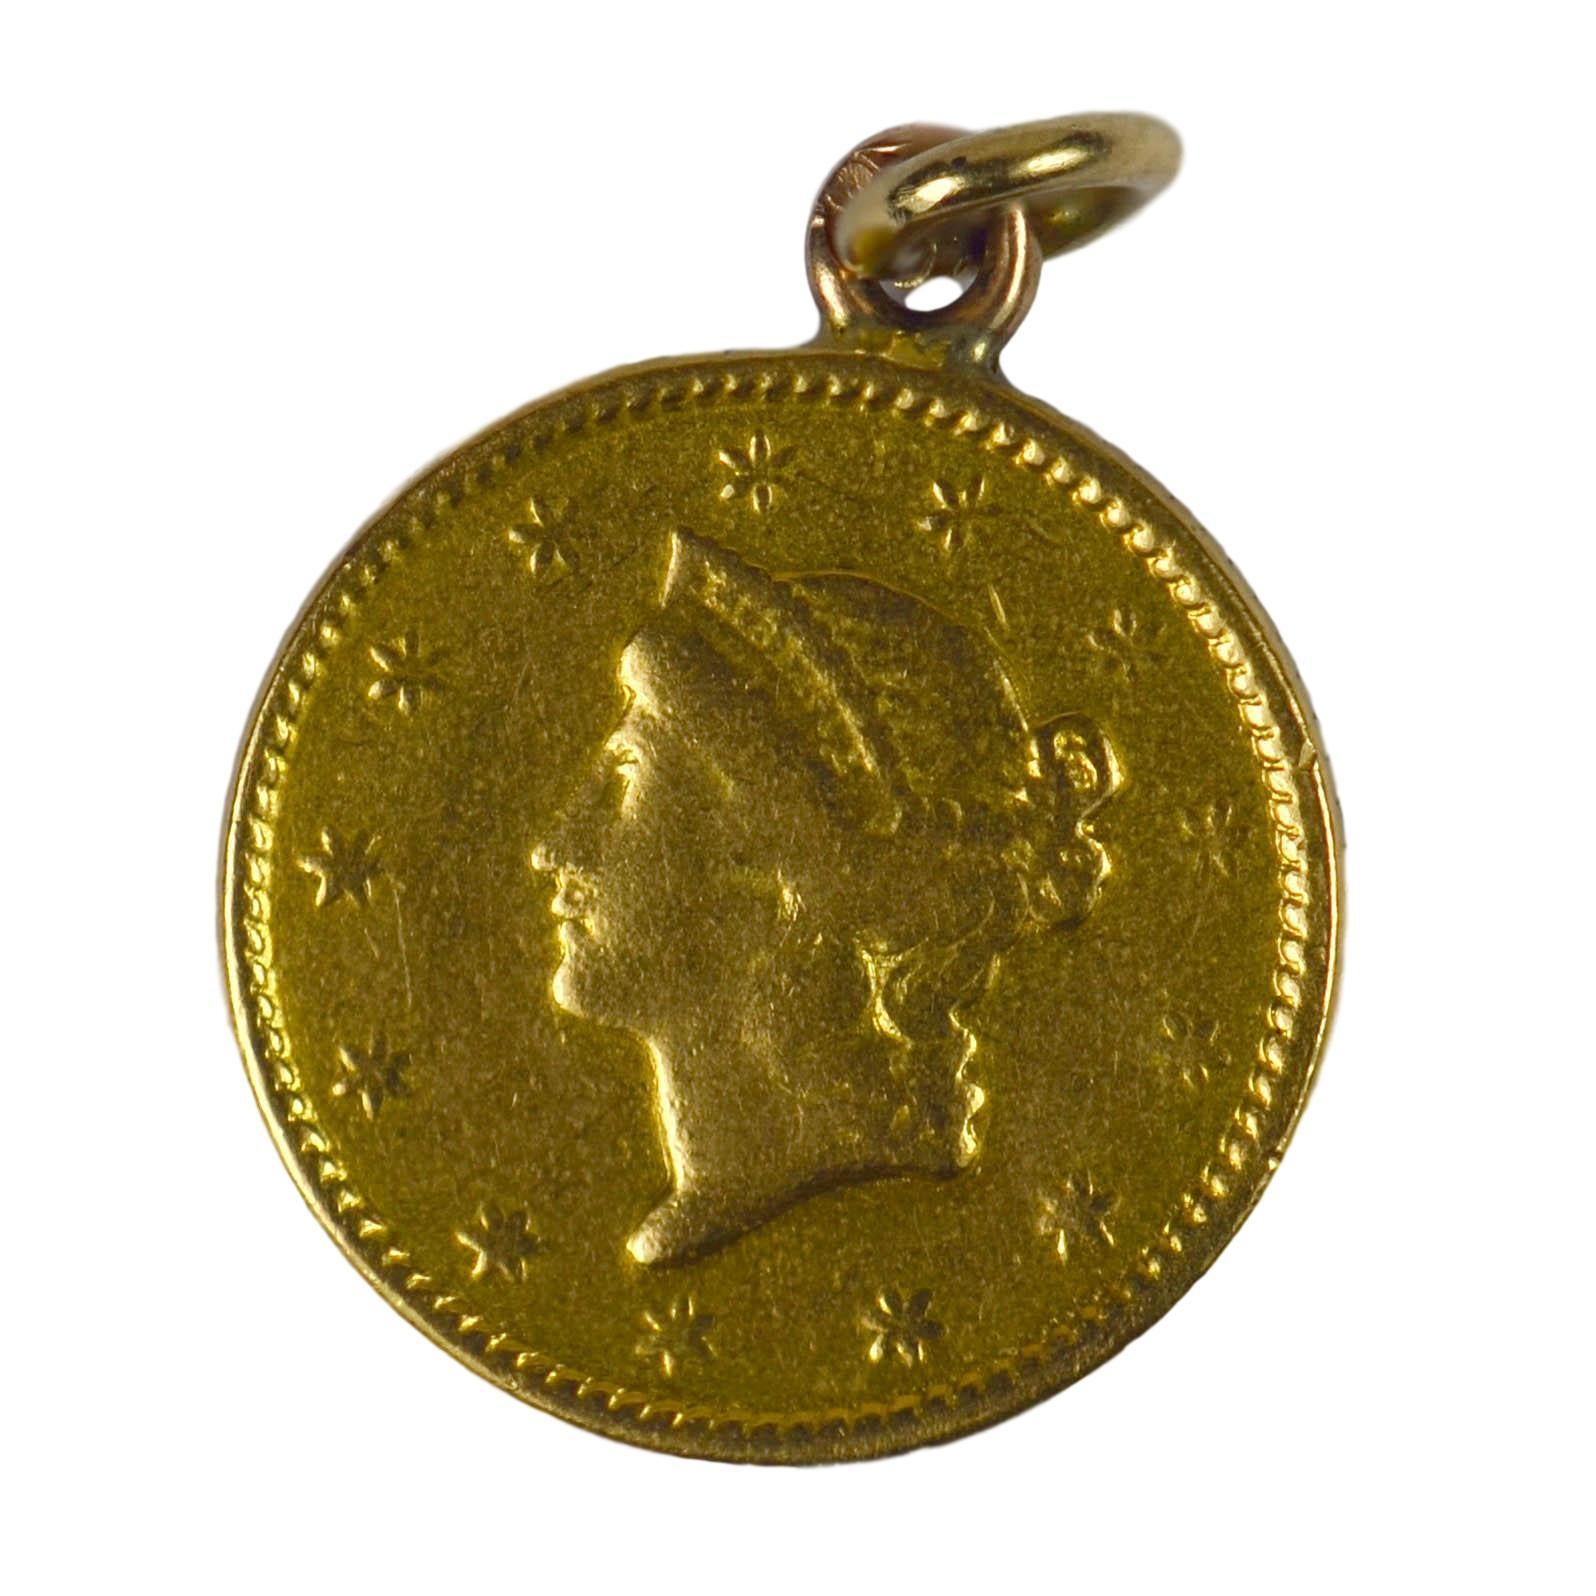 A 24 karat yellow gold 1849 one dollar coin converted to a charm pendant. This coin is the smallest made in US history, and was precipitated by the gold rush. Of numismatic interest, this rare coin has been quality graded as VF.

Known as the 